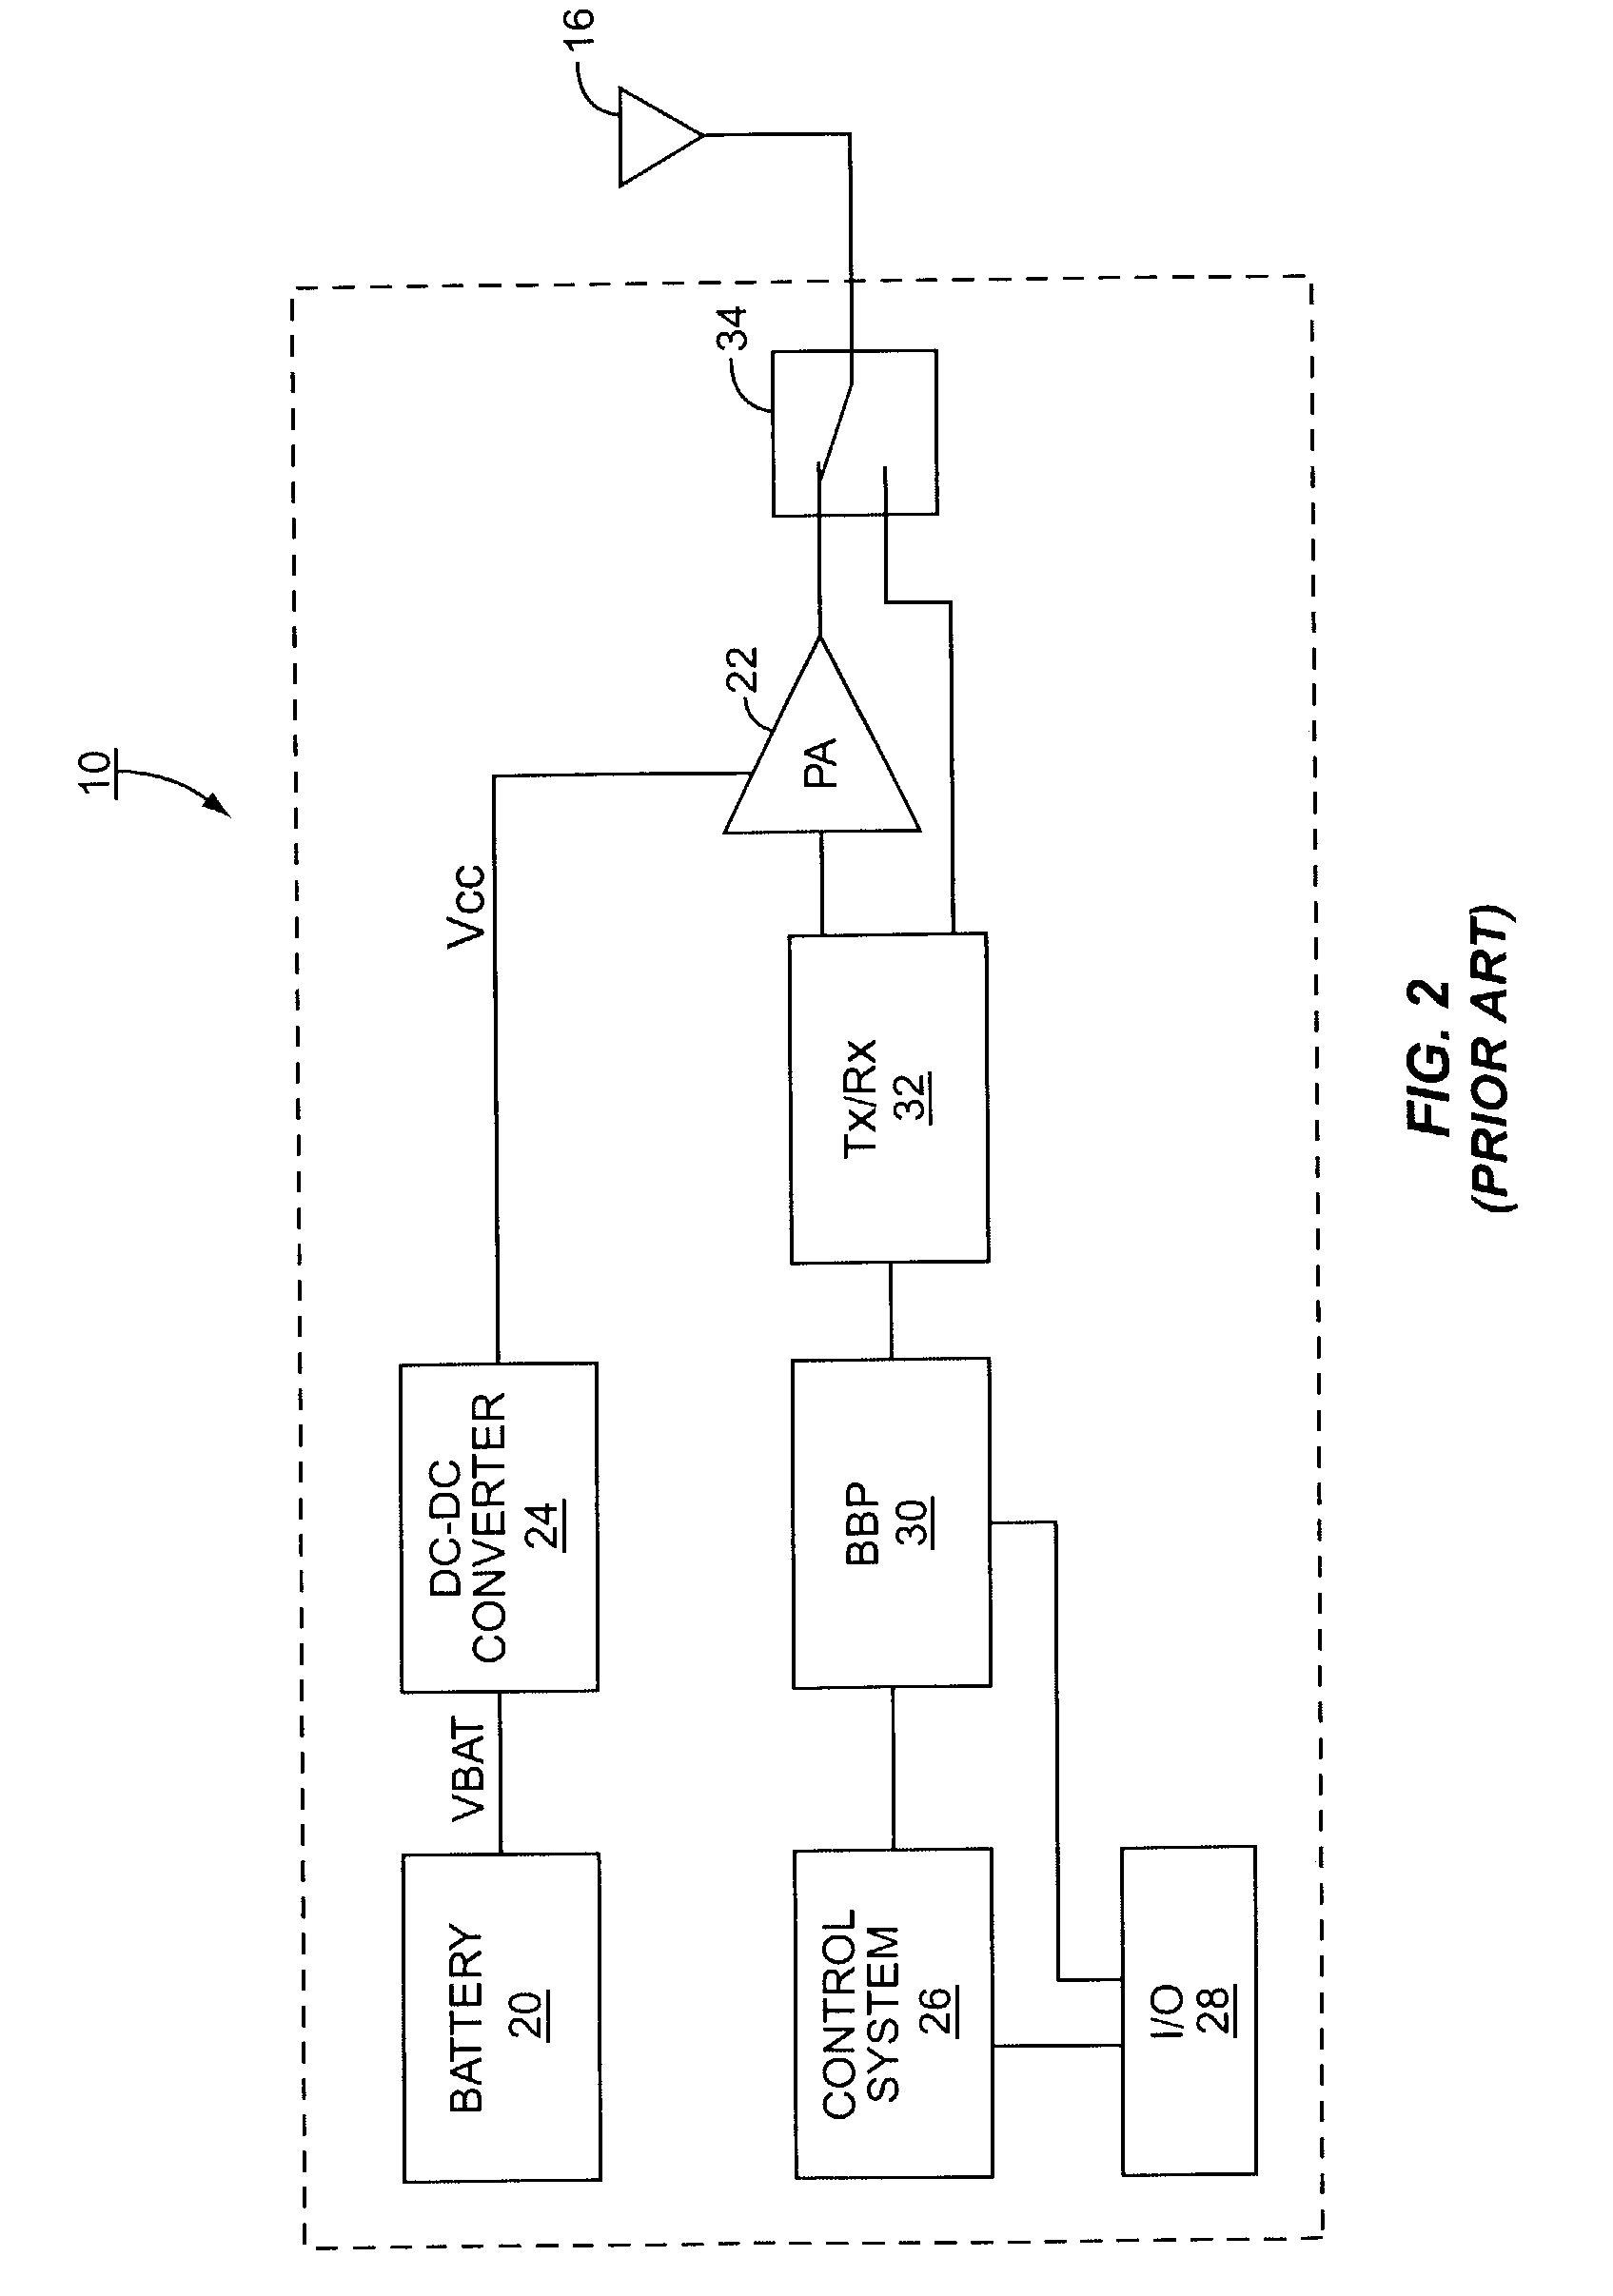 DC-DC converter with reduced electromagnetic interference